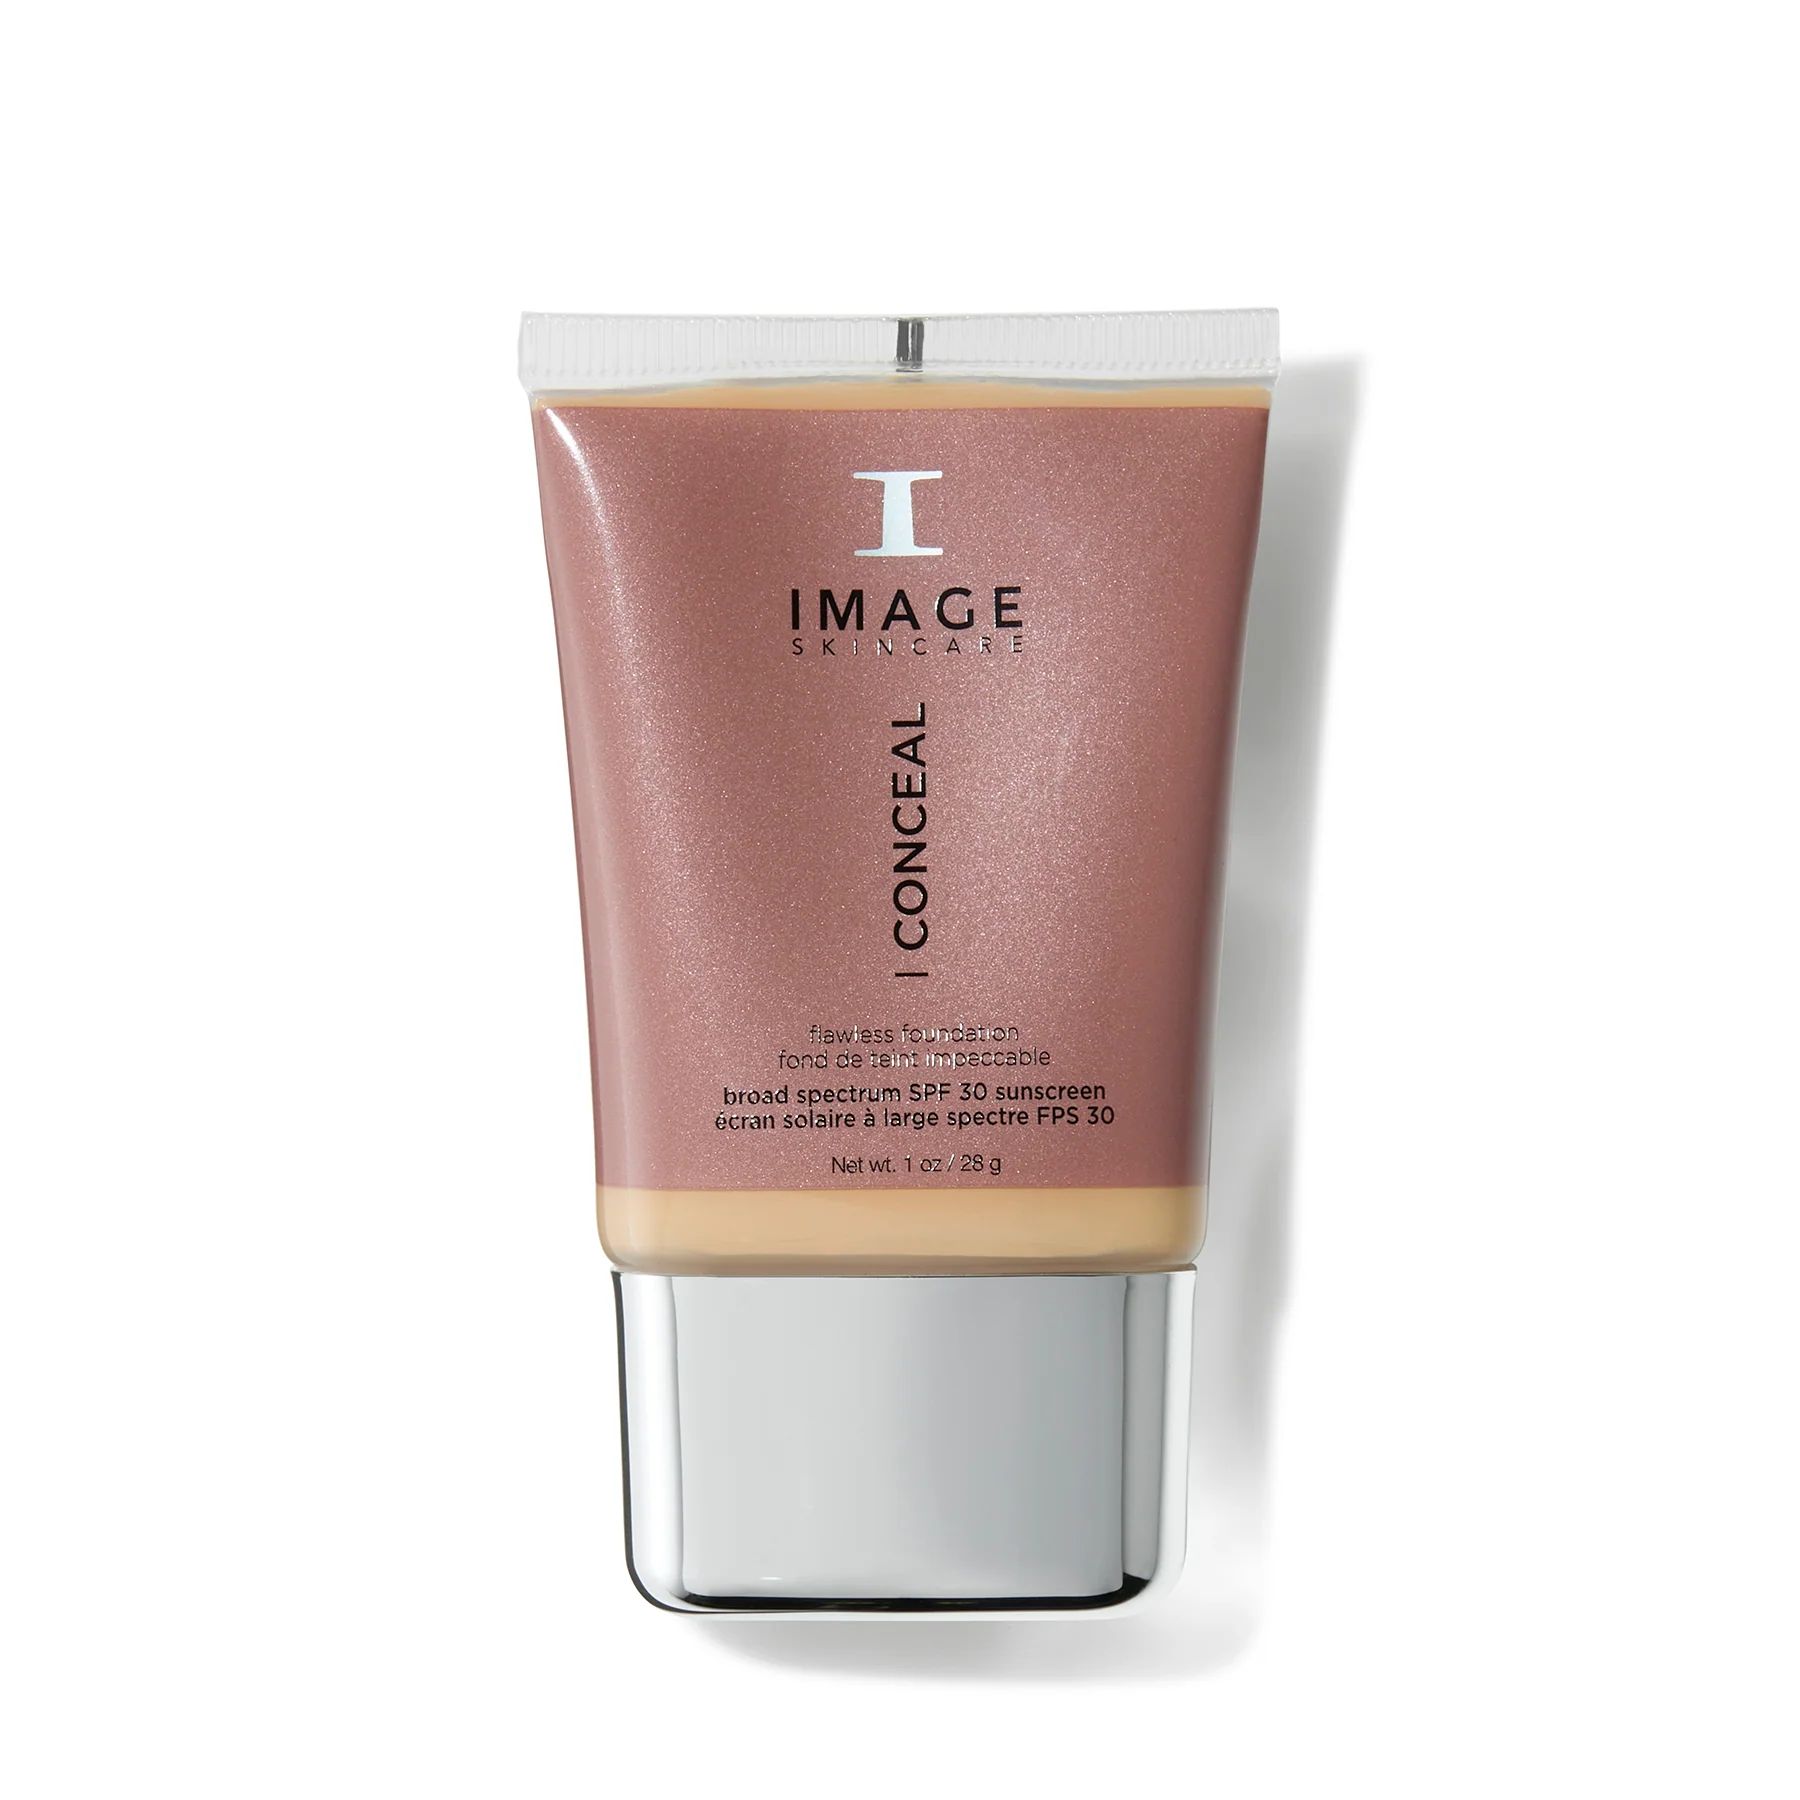 I CONCEAL flawless foundation broad-spectrum SPF 30 sunscreen natural | Image Skincare